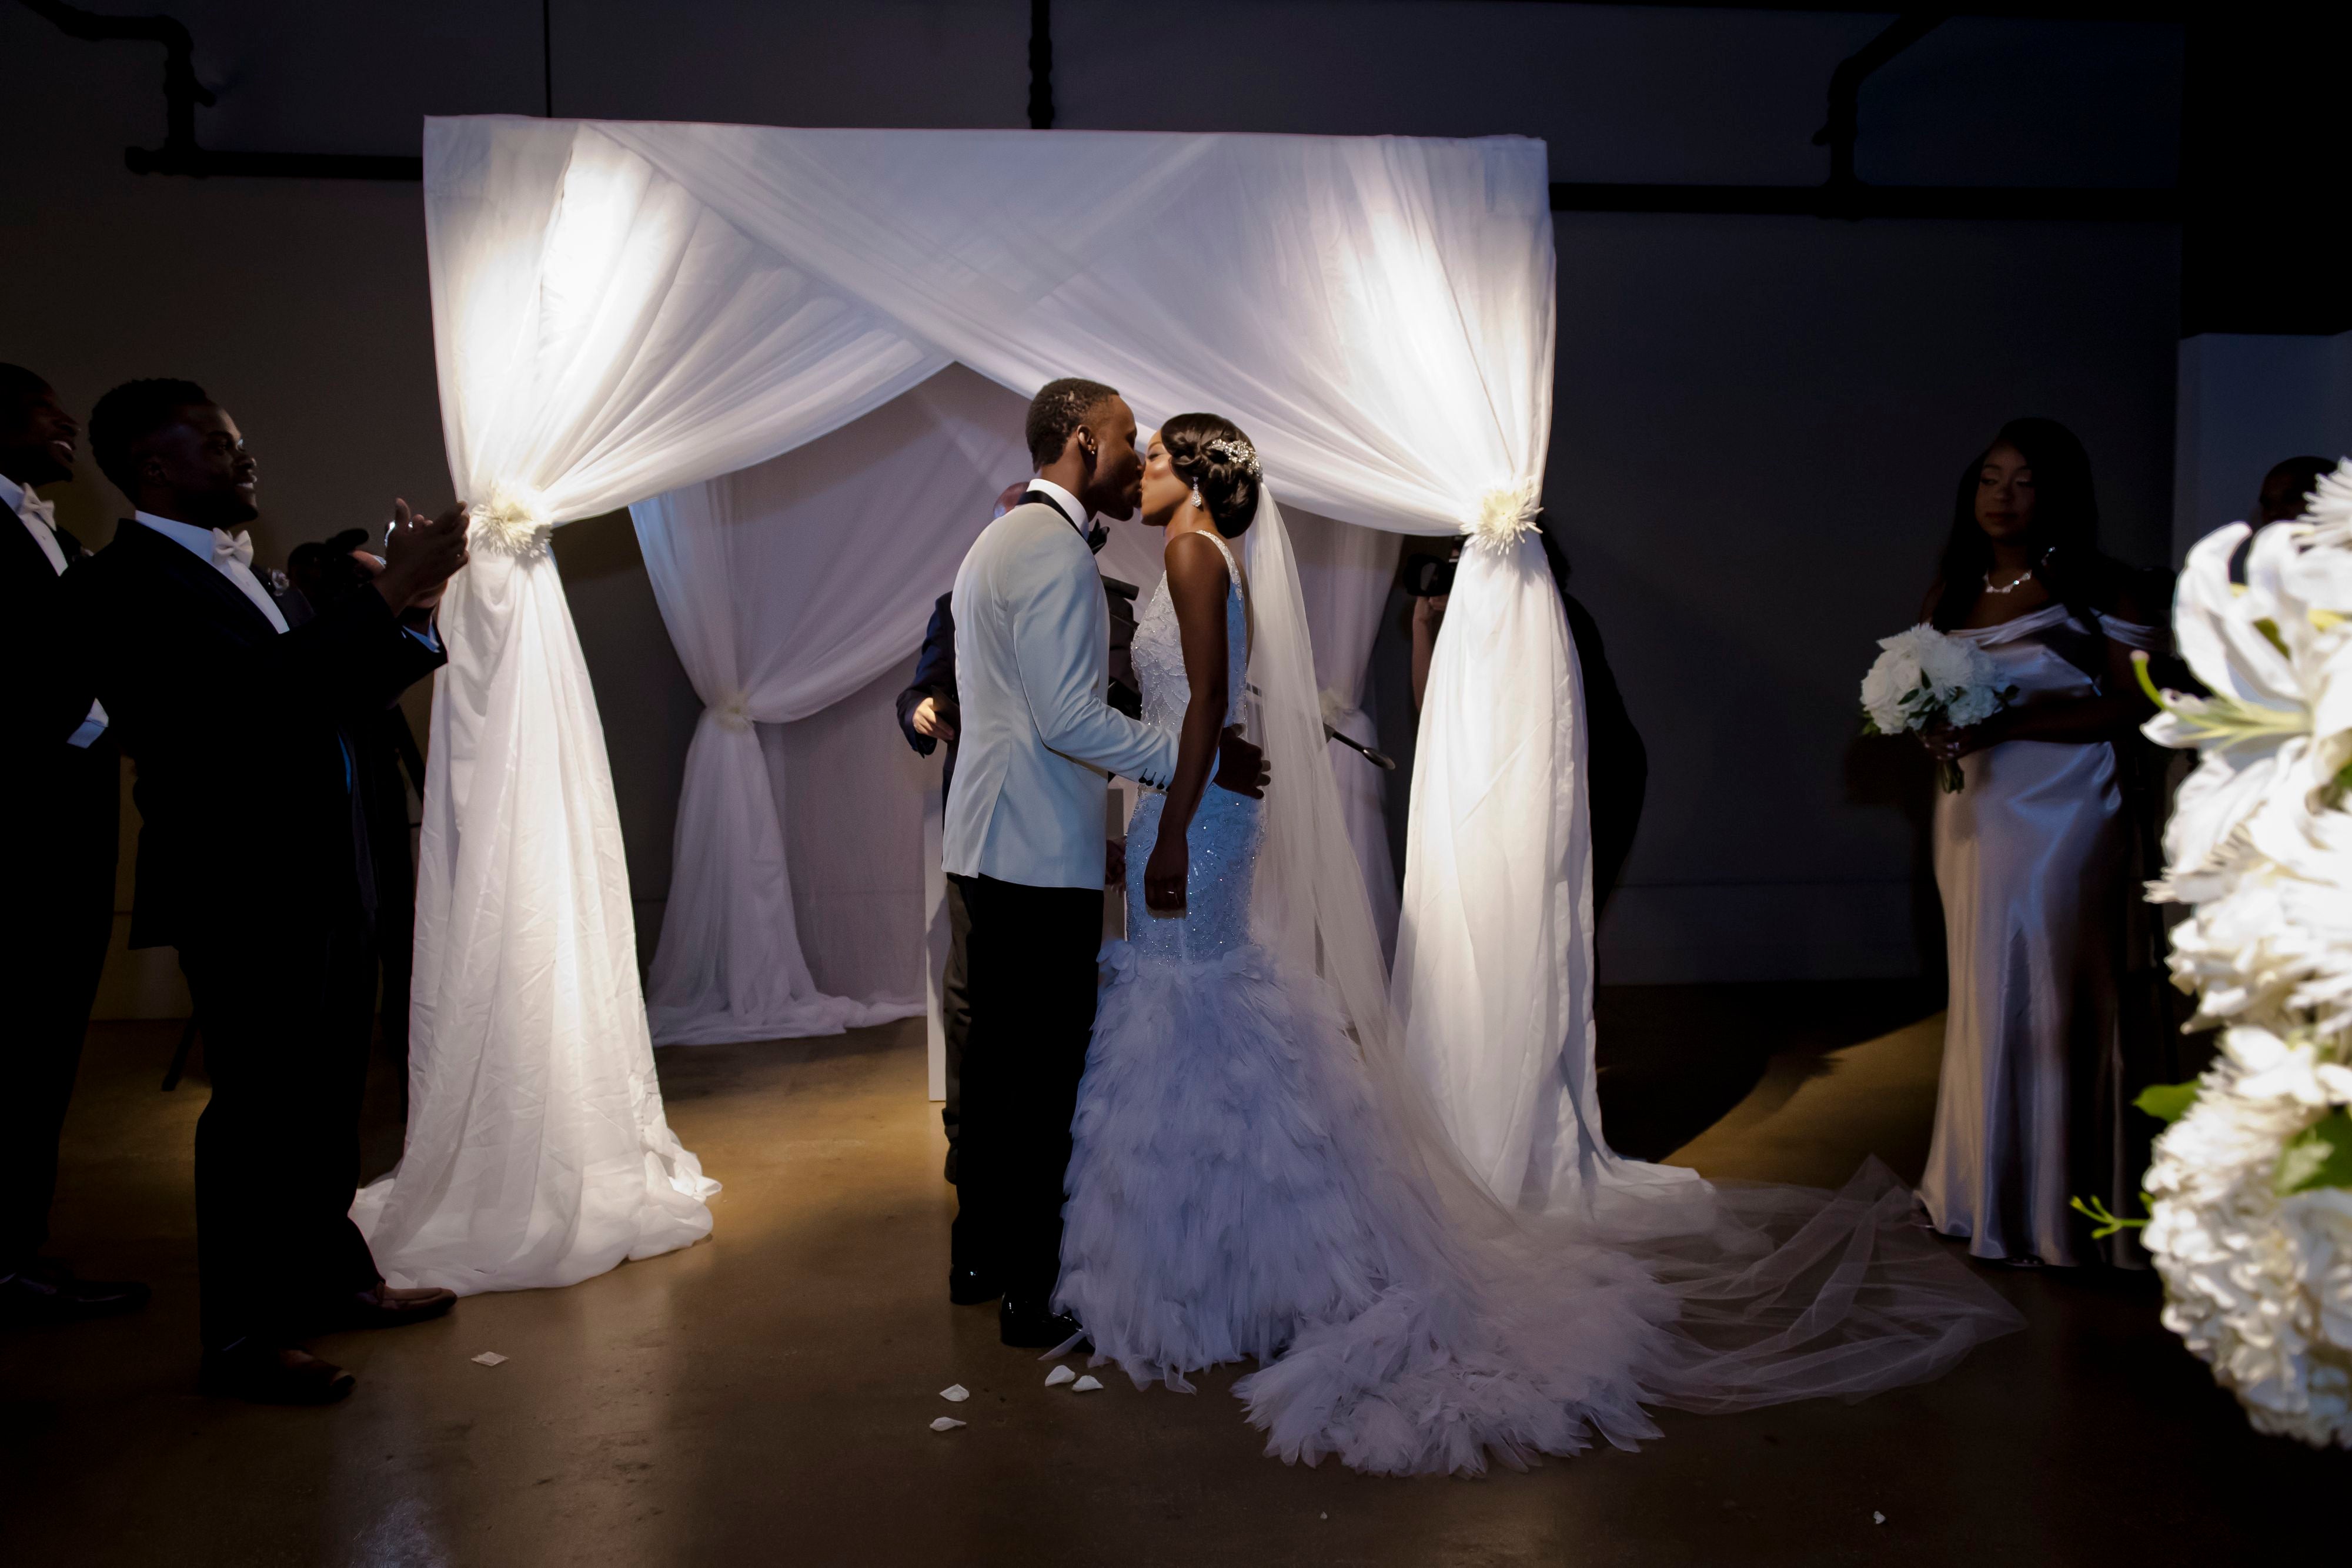 Bridal Bliss: Pierre And Myriam's Wedding In The Gallery Of Amazing Things Was Truly Amazing
